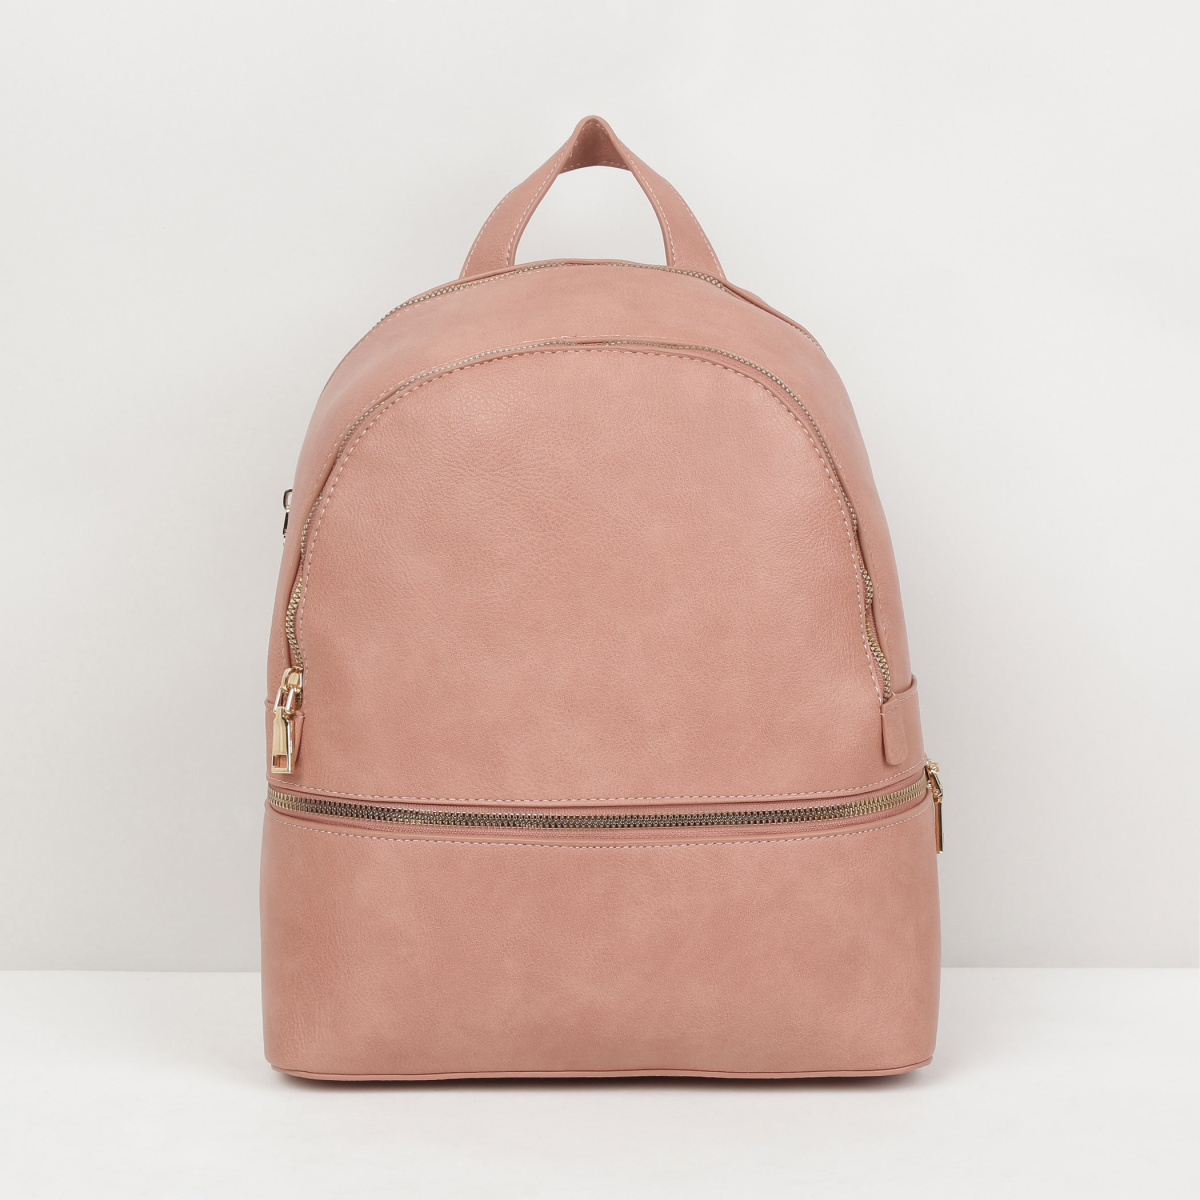 Accessorize London Women's Pink Zip Around Backpack - Accessorize India